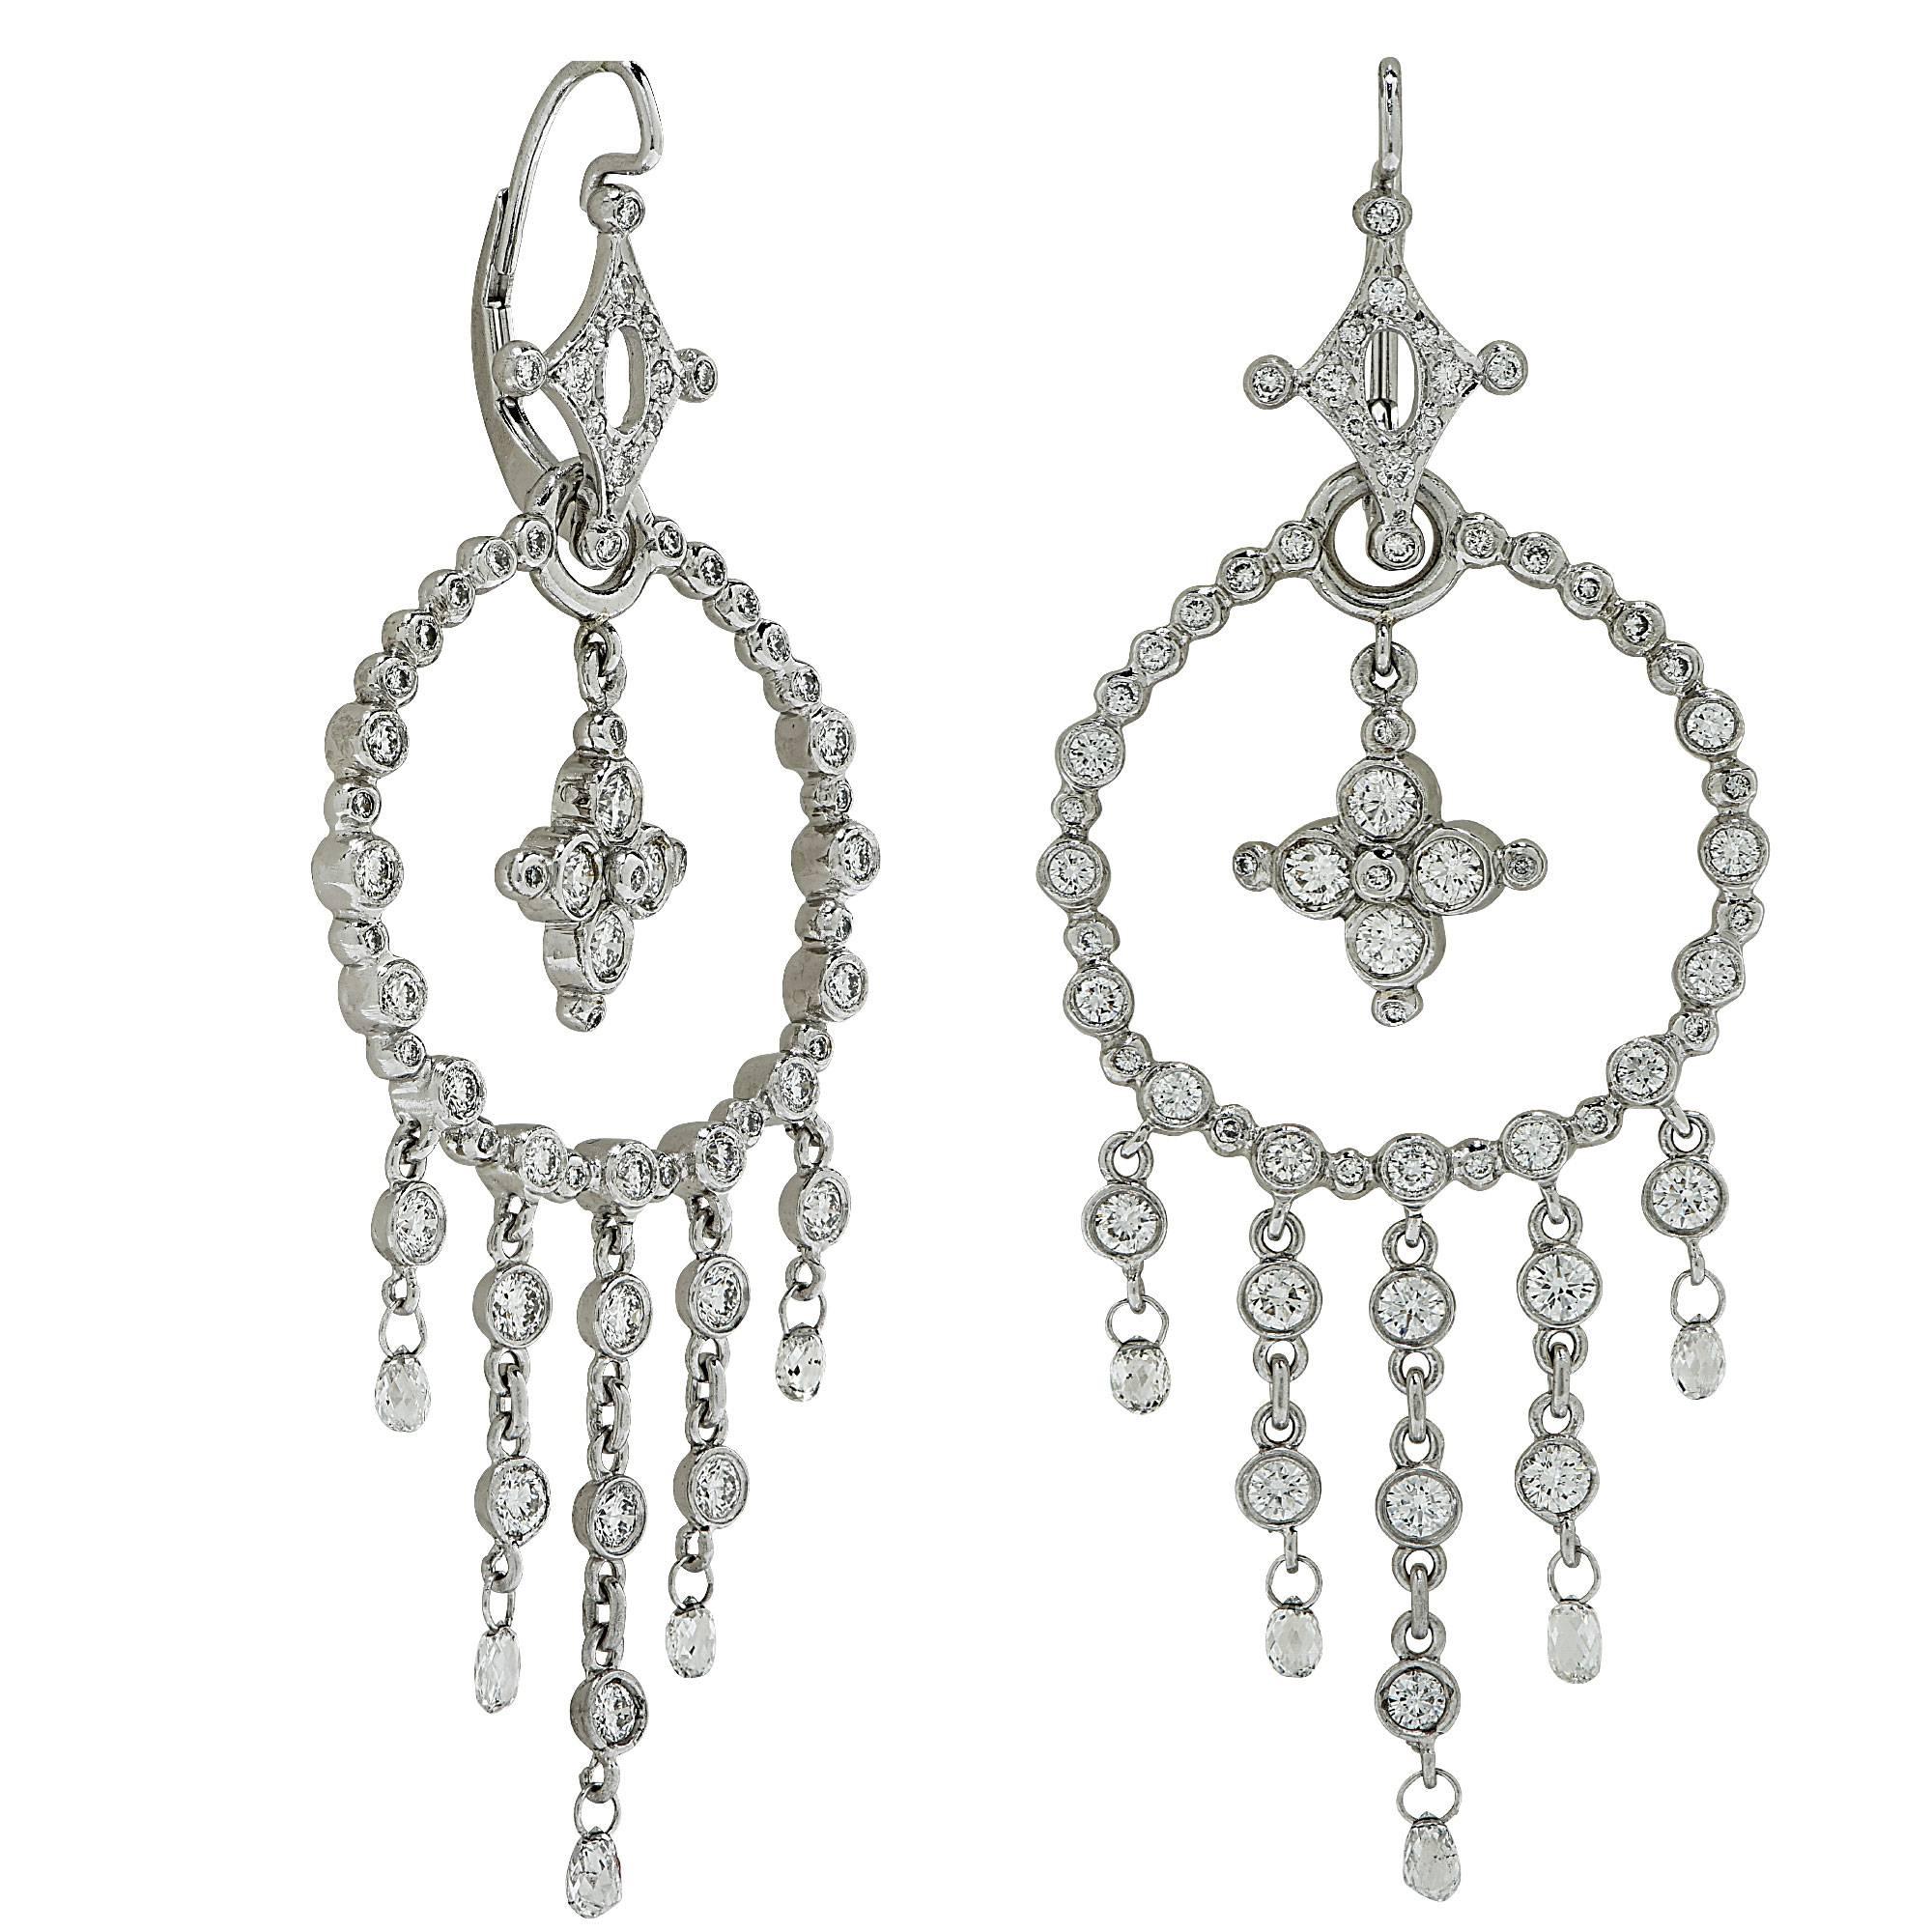 18k white gold dream catcher earrings featuring 122 round brilliant and briolette cut diamonds weighing approximately 2.75cts total G color VS clarity.

These earrings measure 2.65 inches in height by 1.01 inch in width by .30 inch in depth.
It